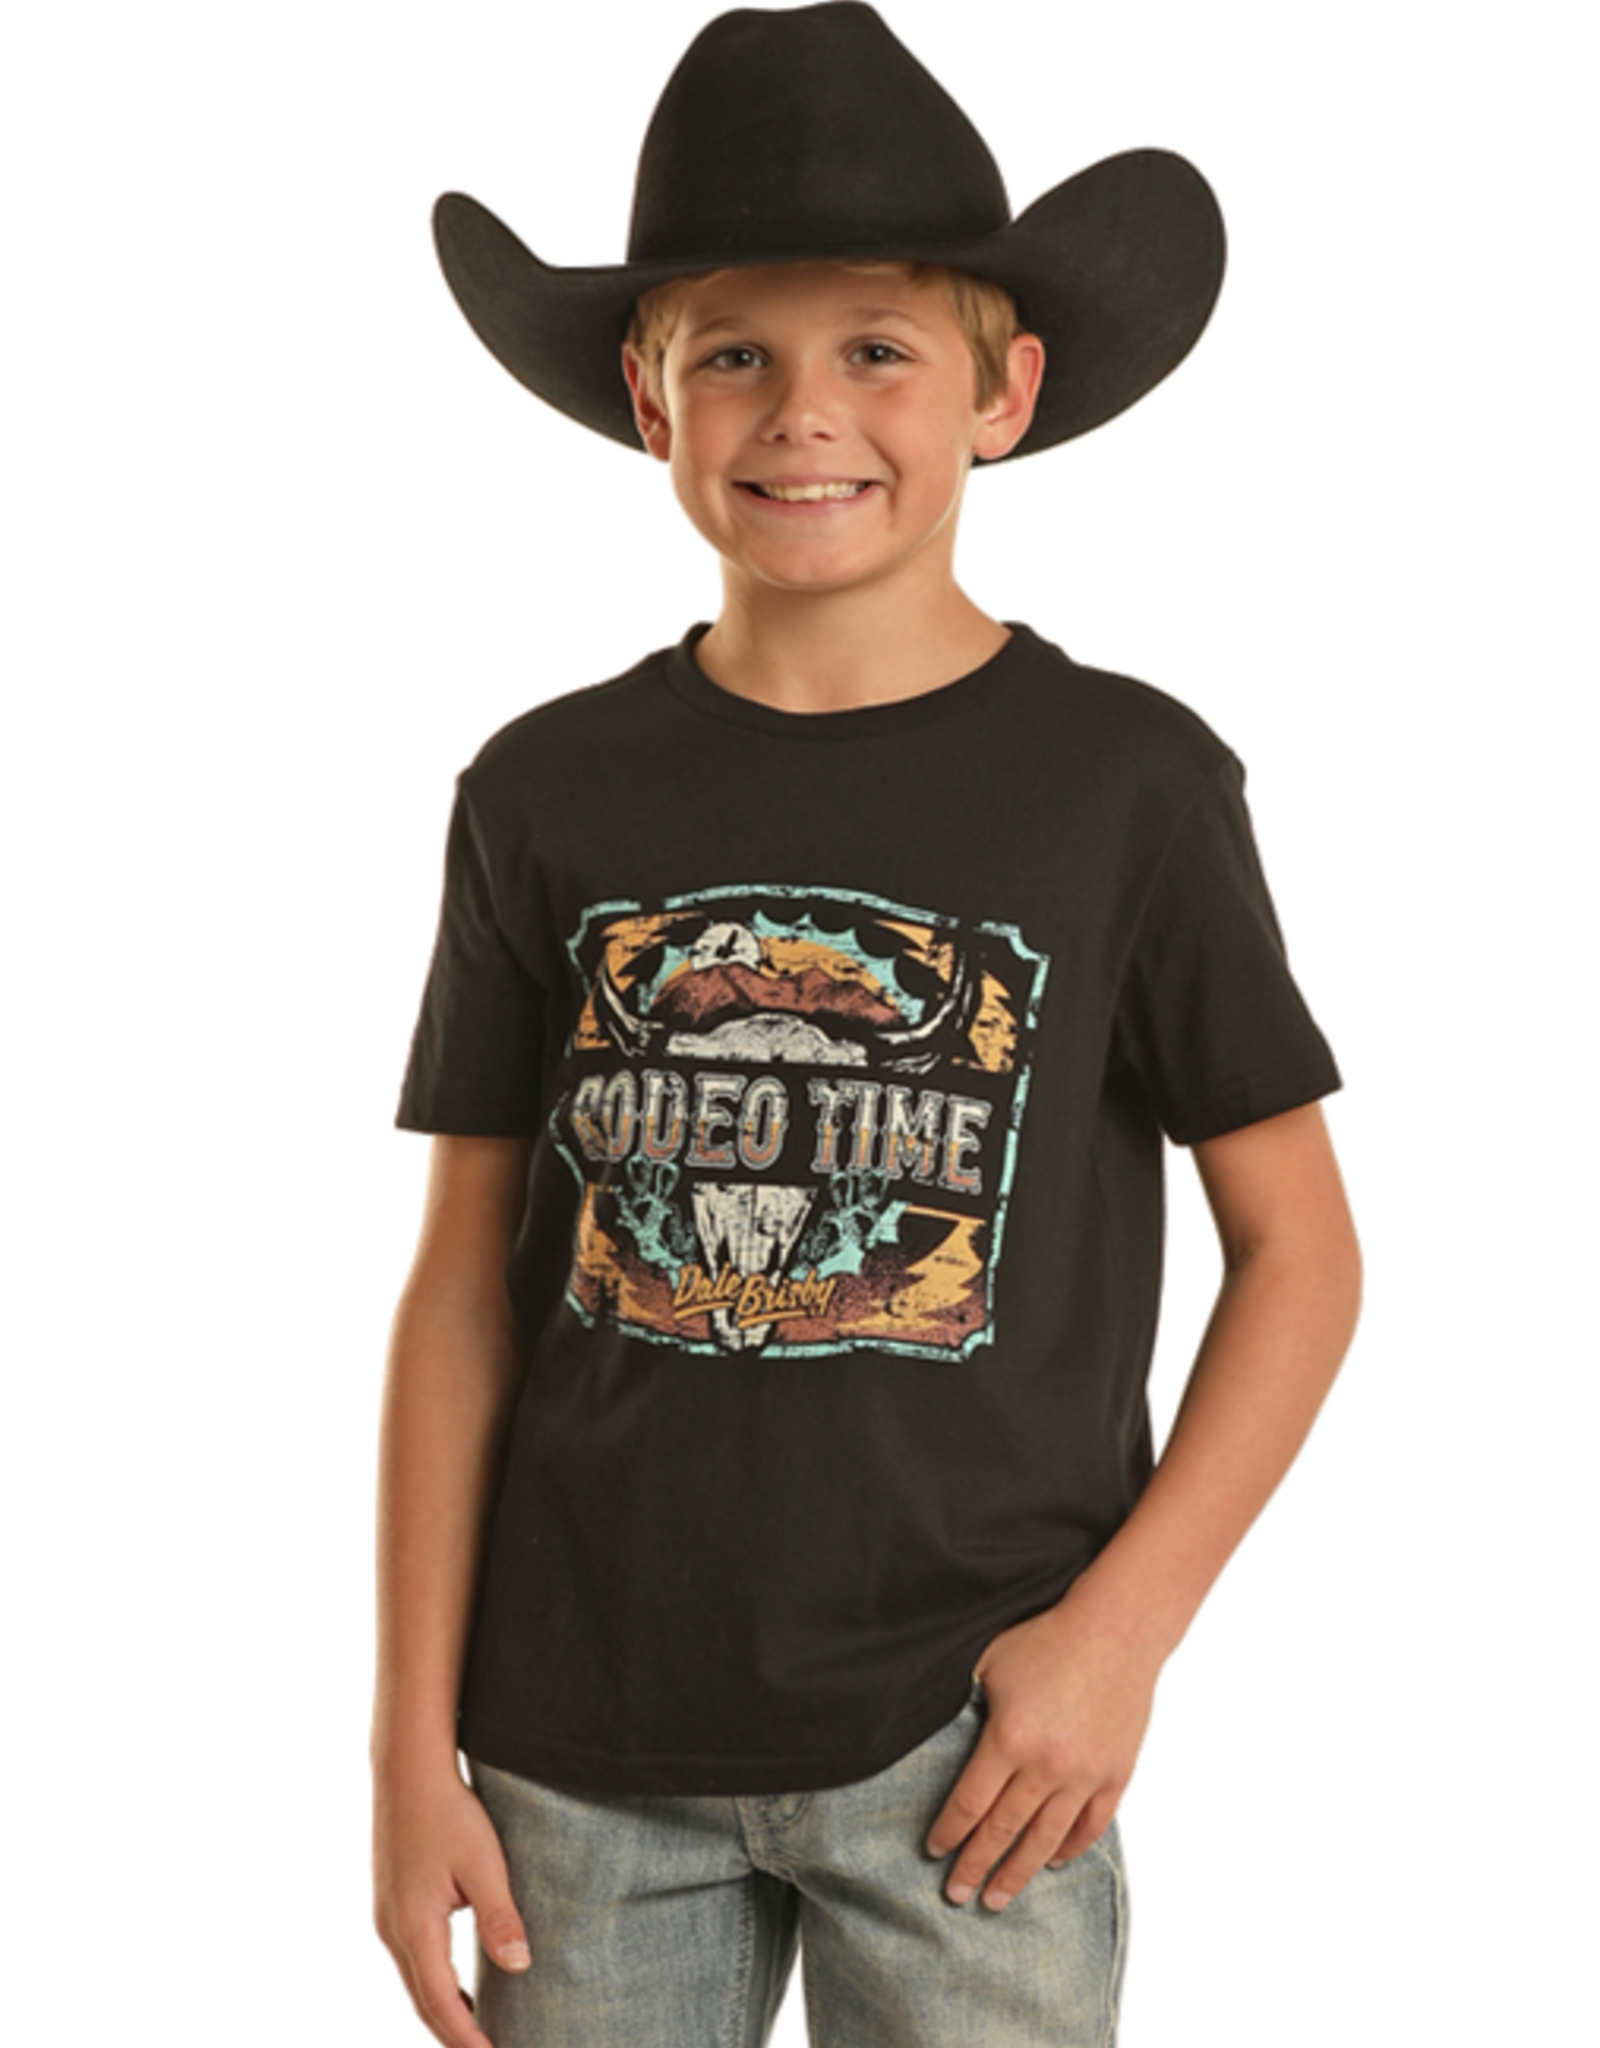 Boys Dale Brisby Rodeo TIme Black Short Sleeve T Shirt